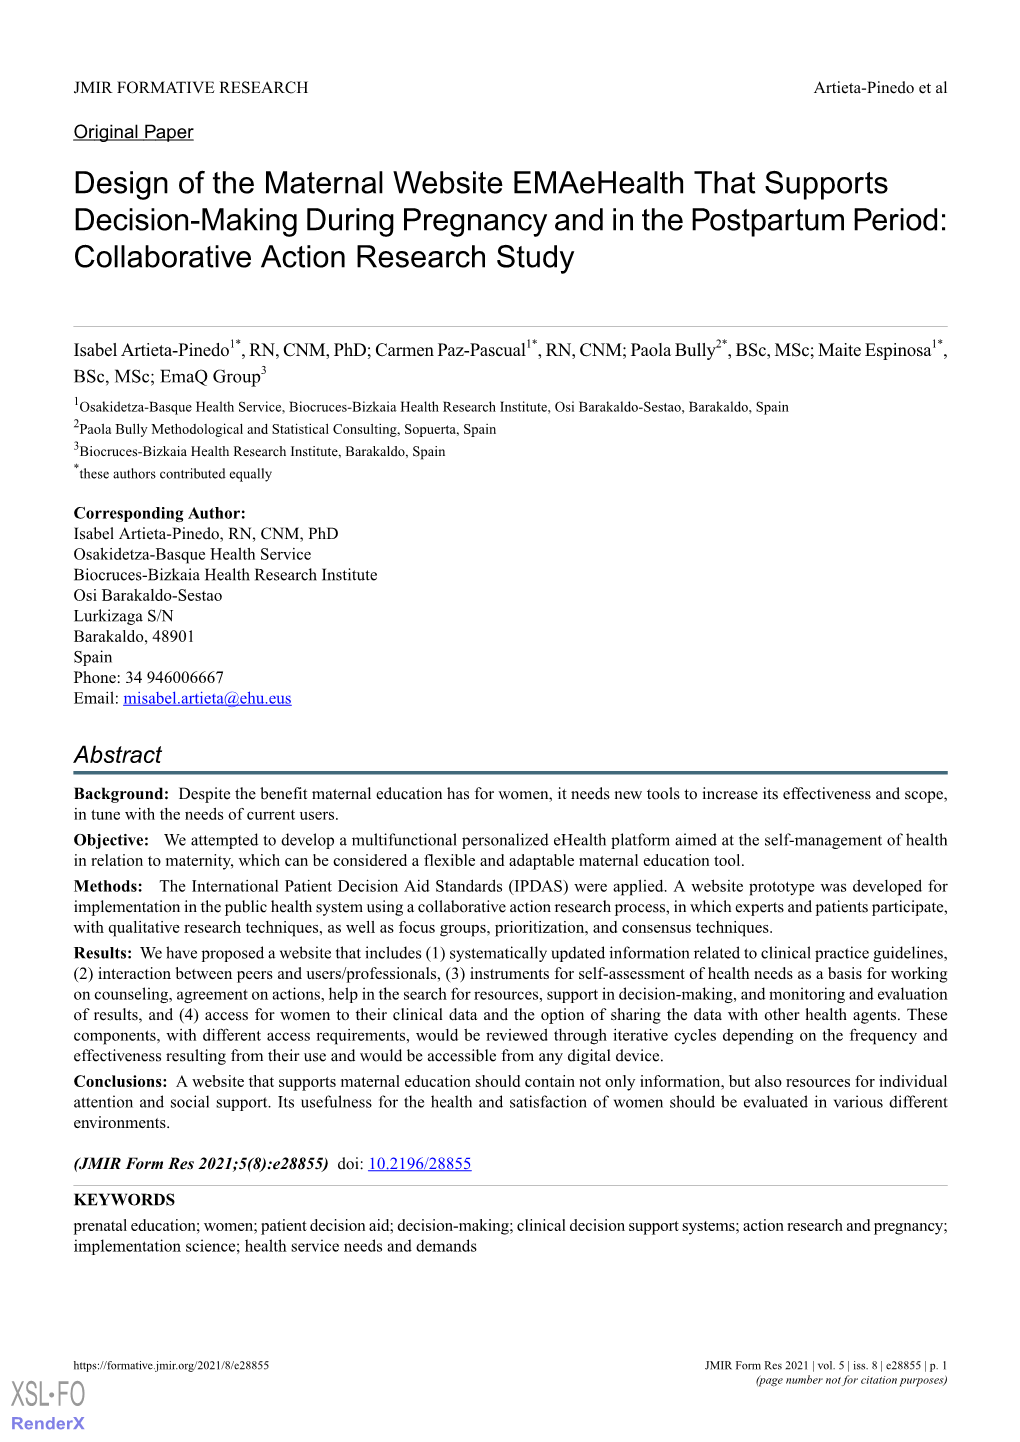 Design of the Maternal Website Emaehealth That Supports Decision-Making During Pregnancy and in the Postpartum Period: Collaborative Action Research Study